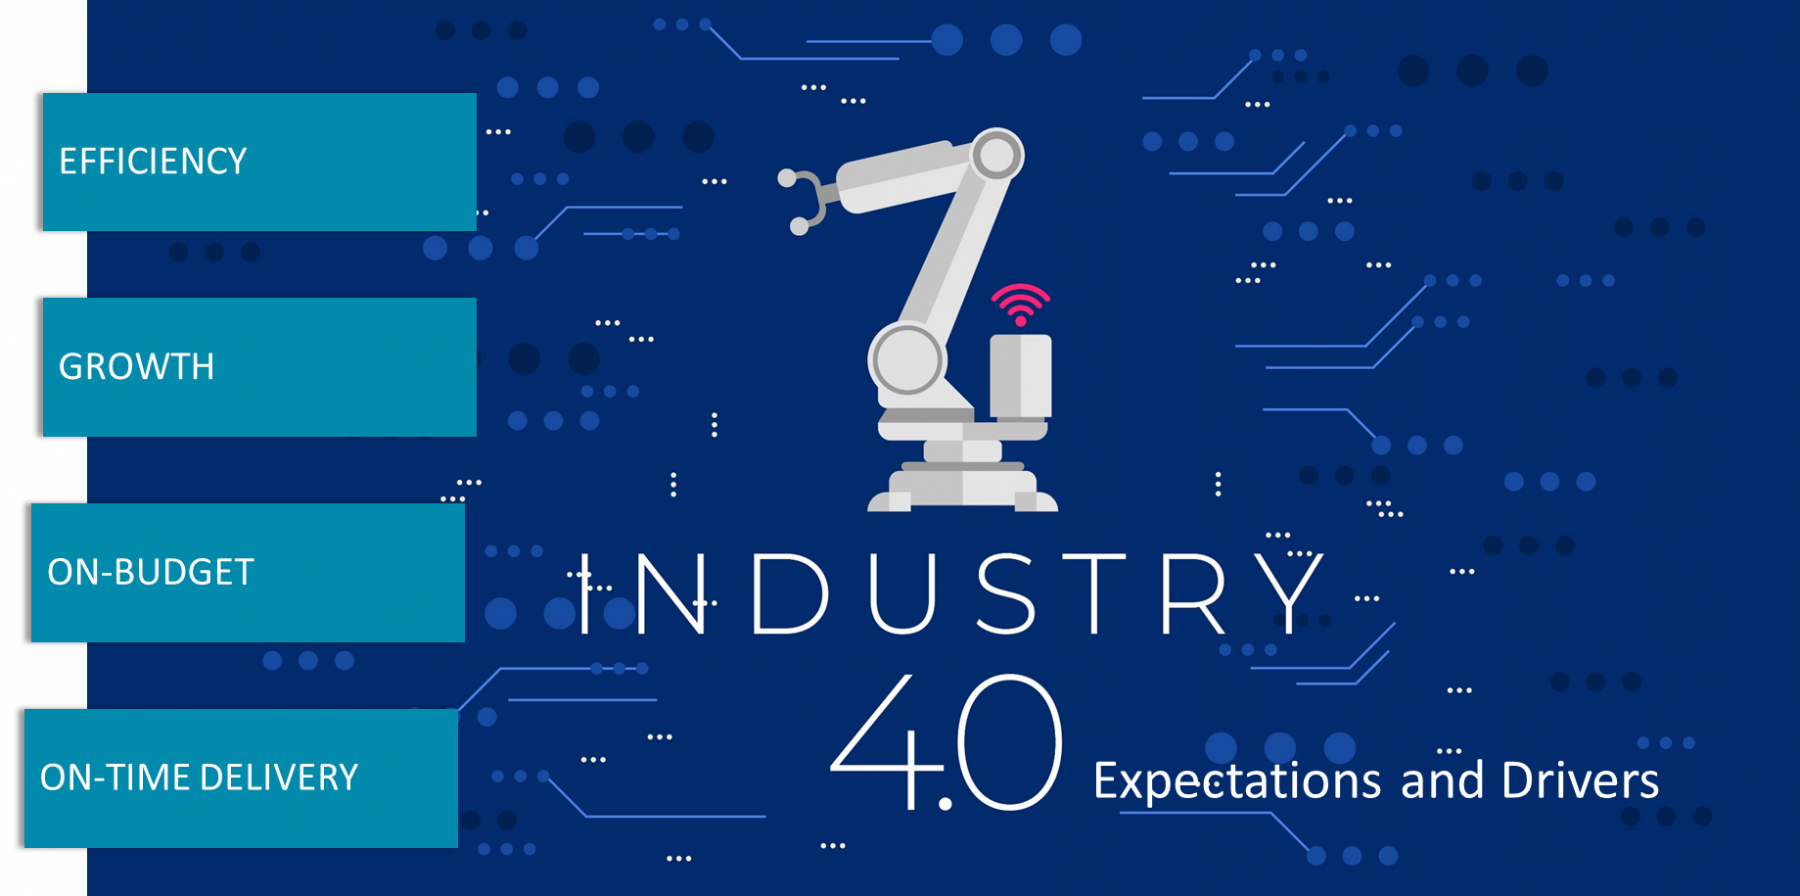 four key drives for industry 4.0 adoption are cost, on time delivery, rate and flexibility